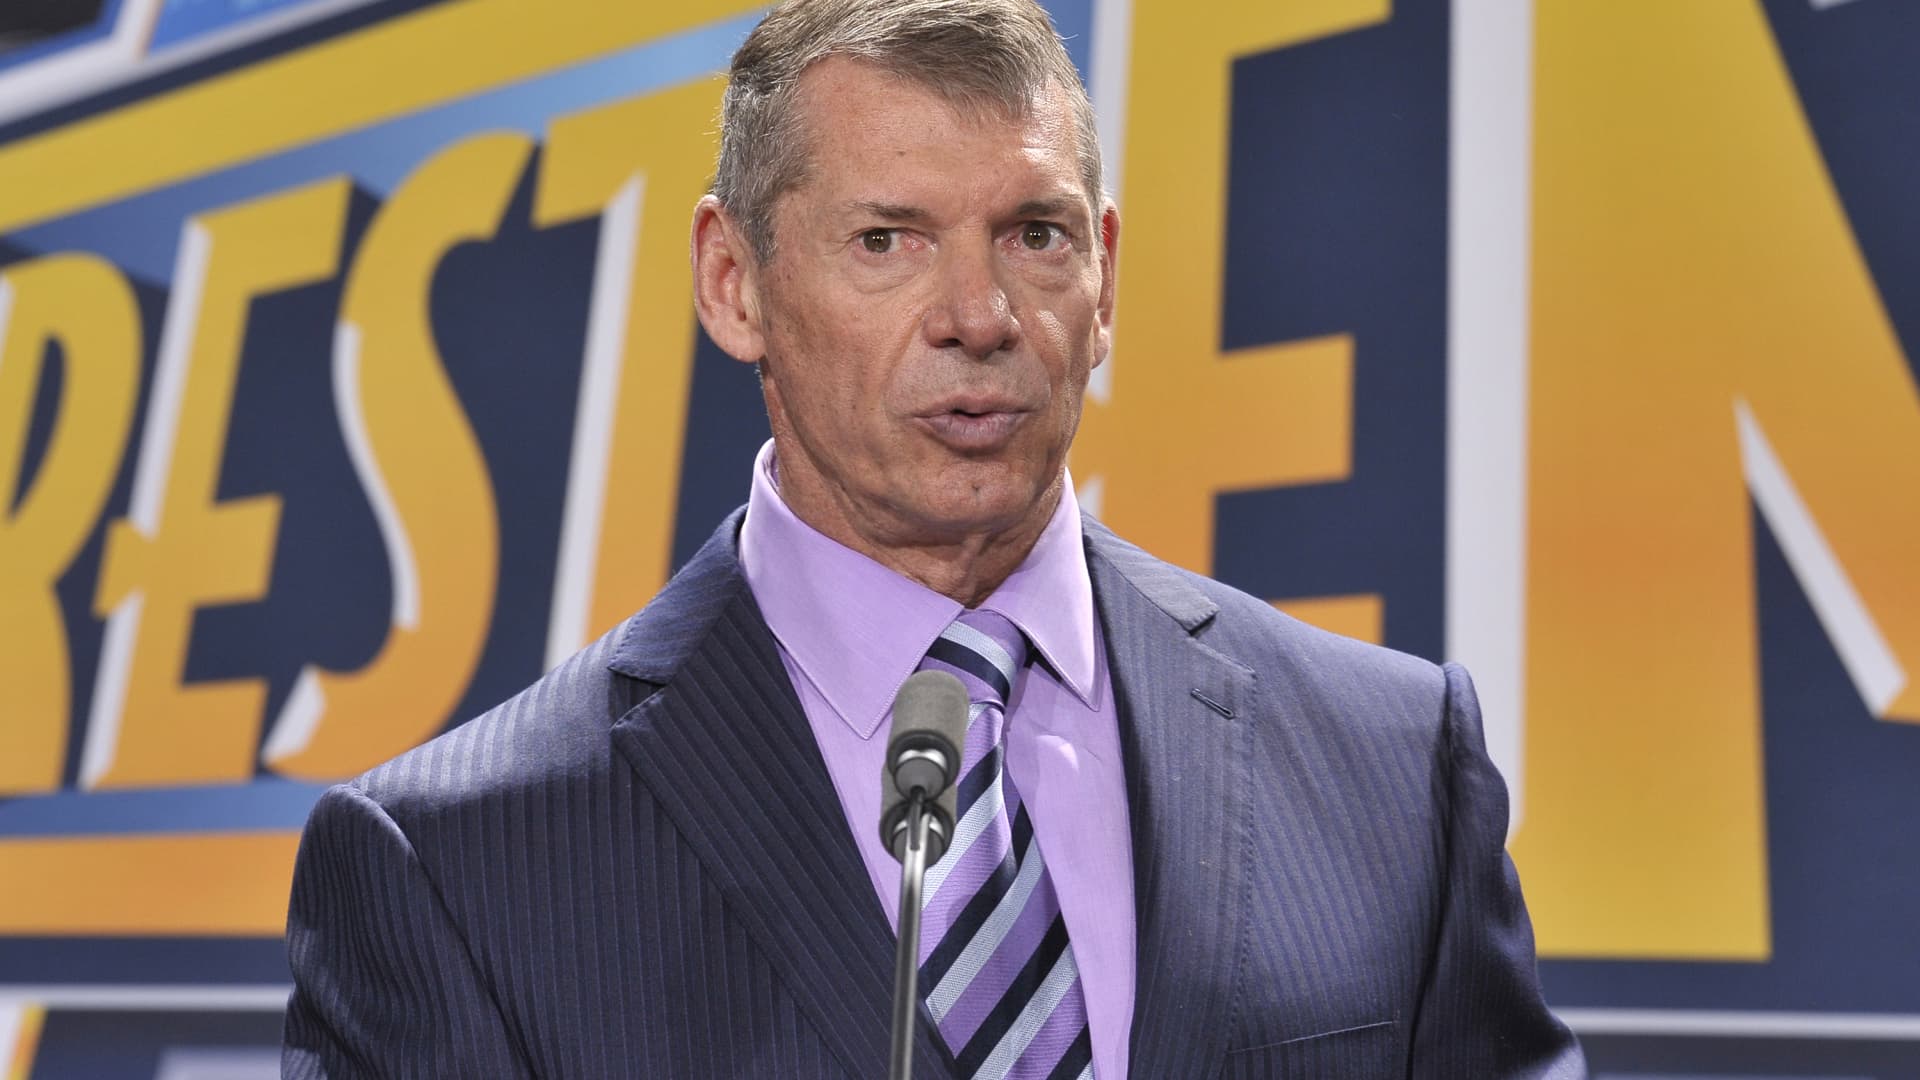 WWE board investigates secret $3 million hush payment by CEO Vince McMahon, report says